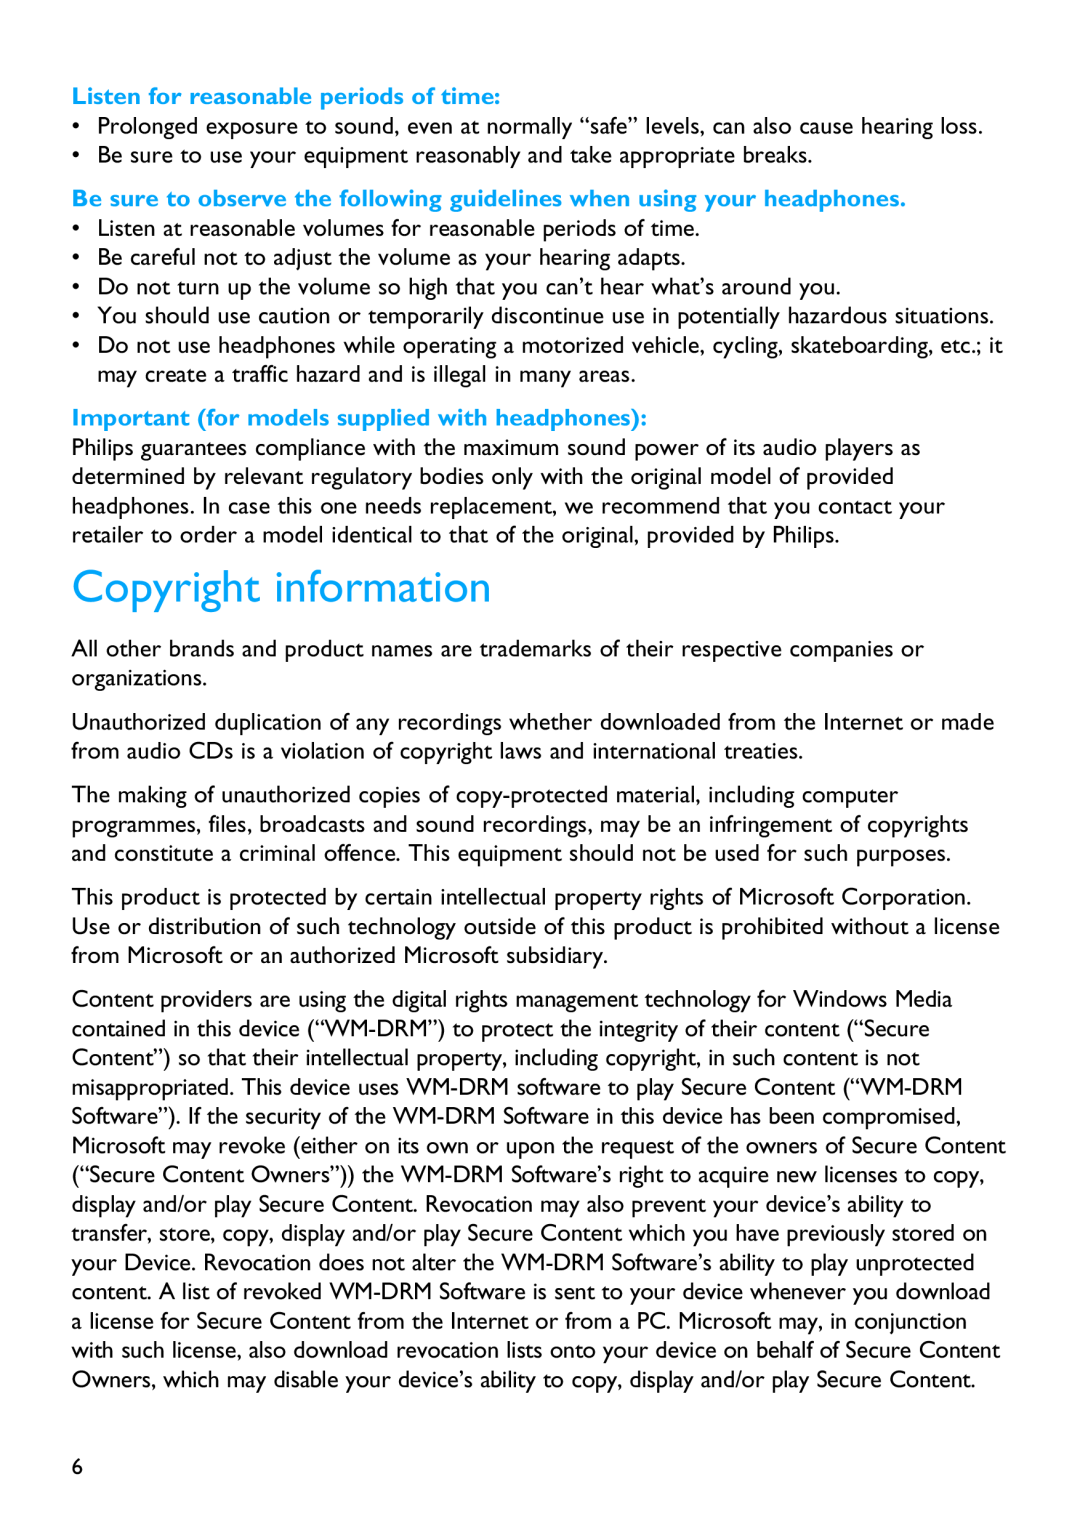 Philips SA4127 Copyright information, Listen for reasonable periods of time, Important for models supplied with headphones 